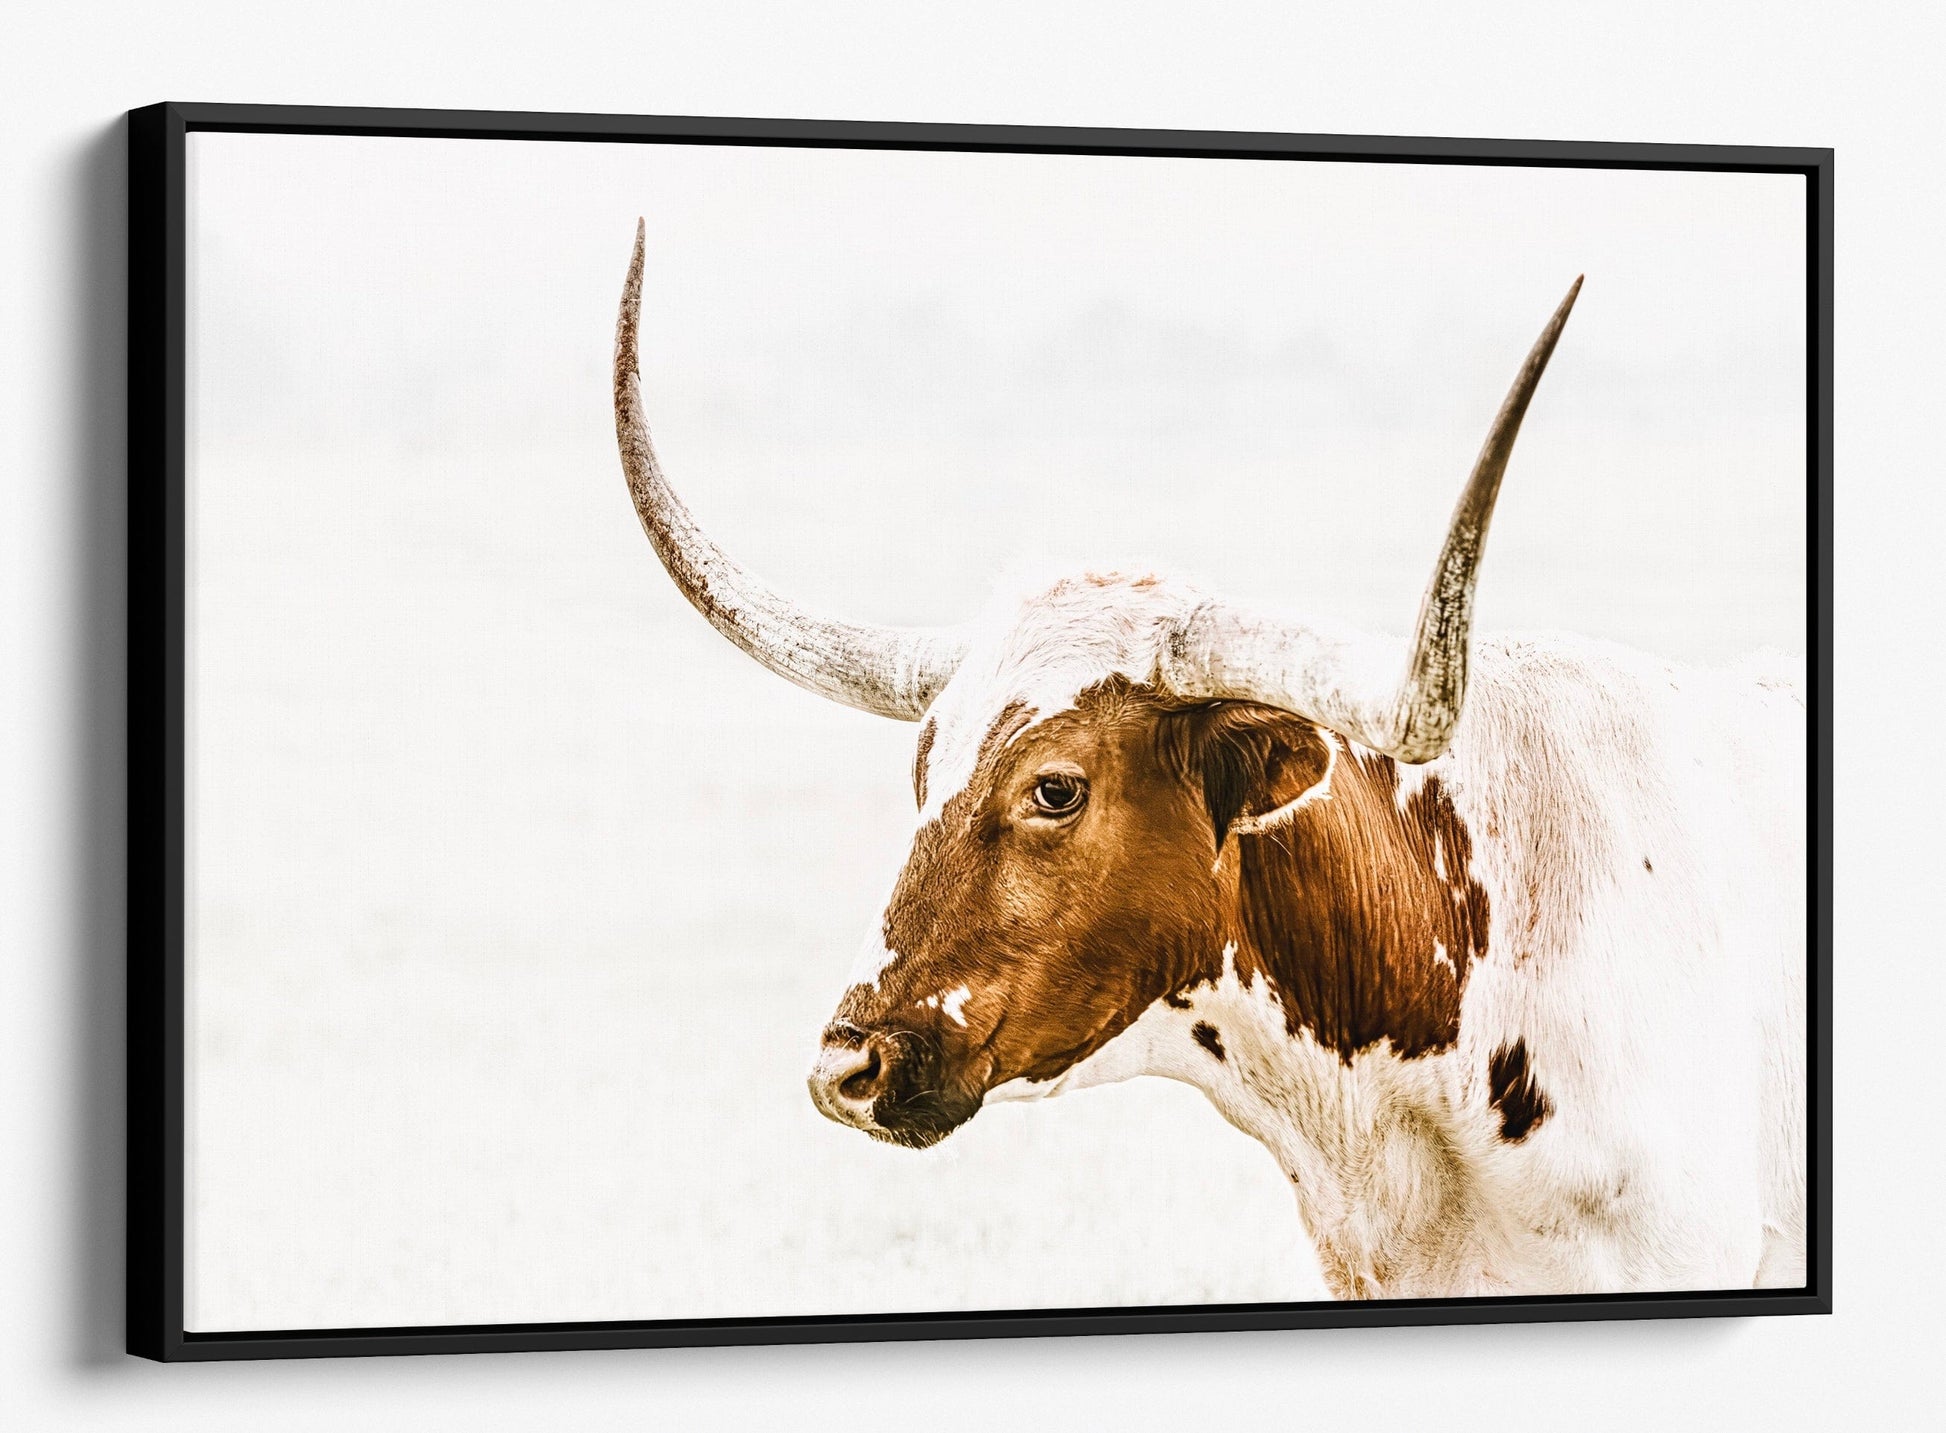 Longhorn Canvas in Sepia Browns Canvas-Black Frame / 12 x 18 Inches Wall Art Teri James Photography